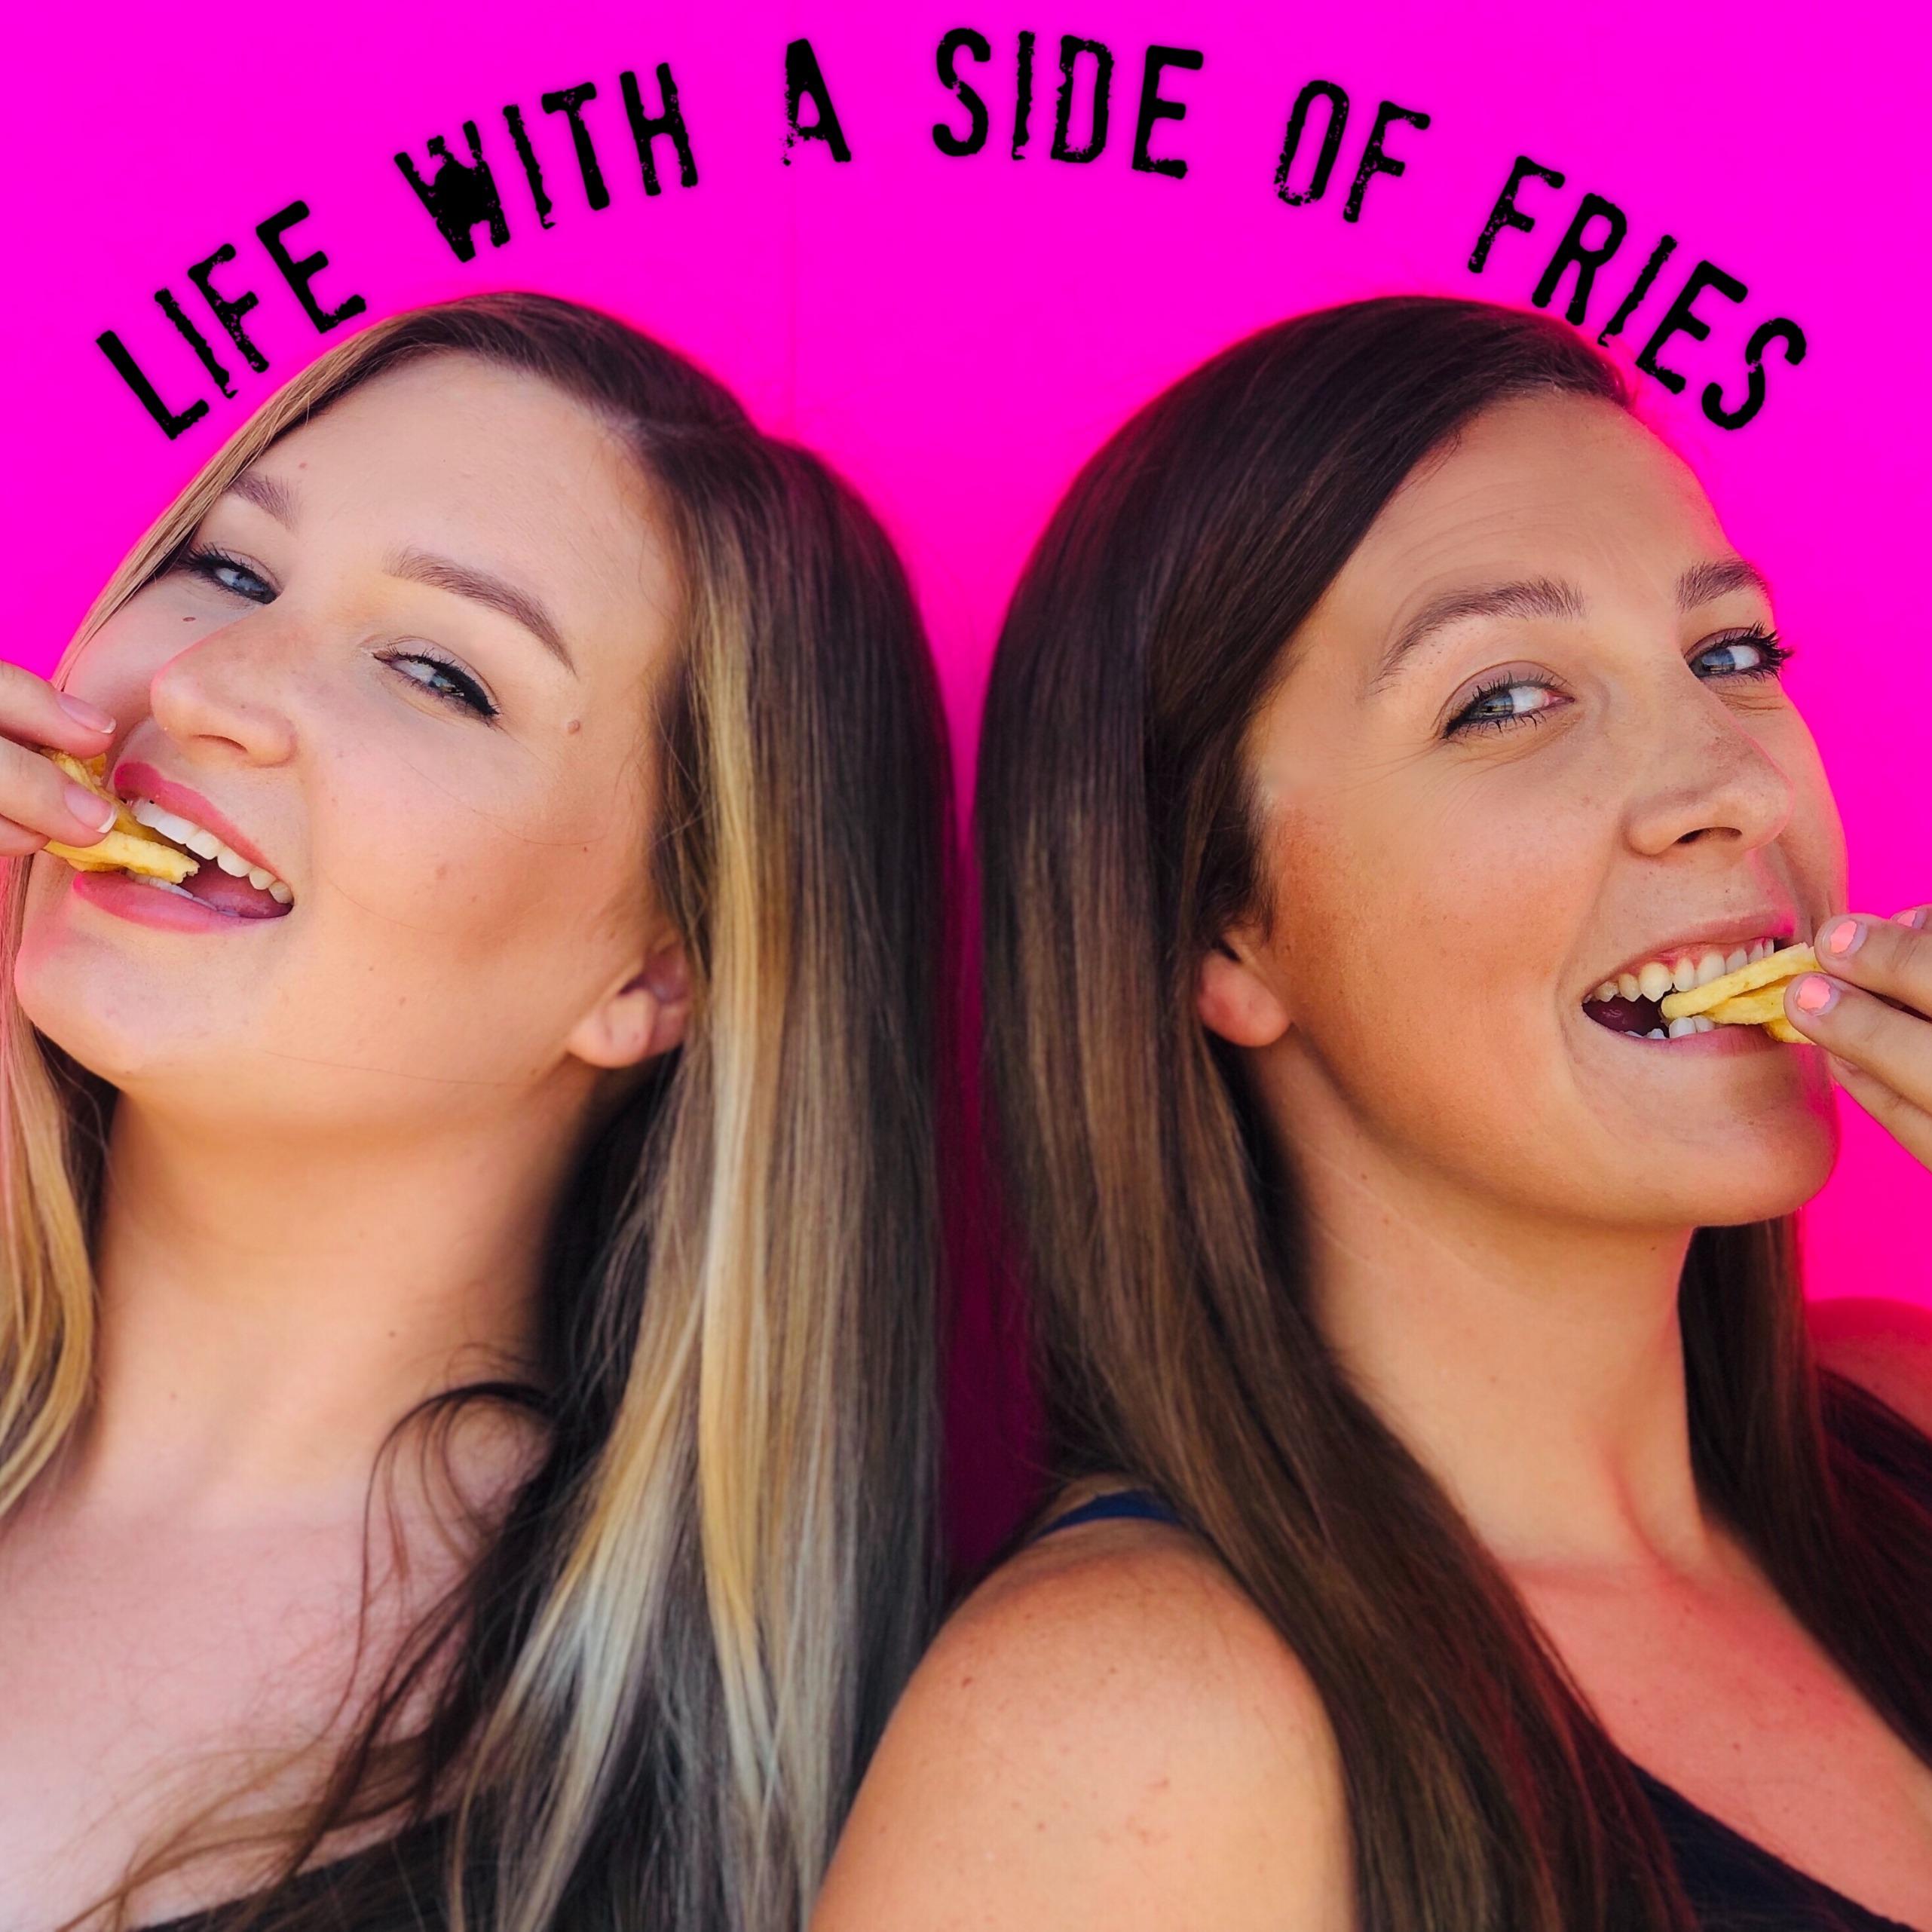 Life With A Side Of Fries